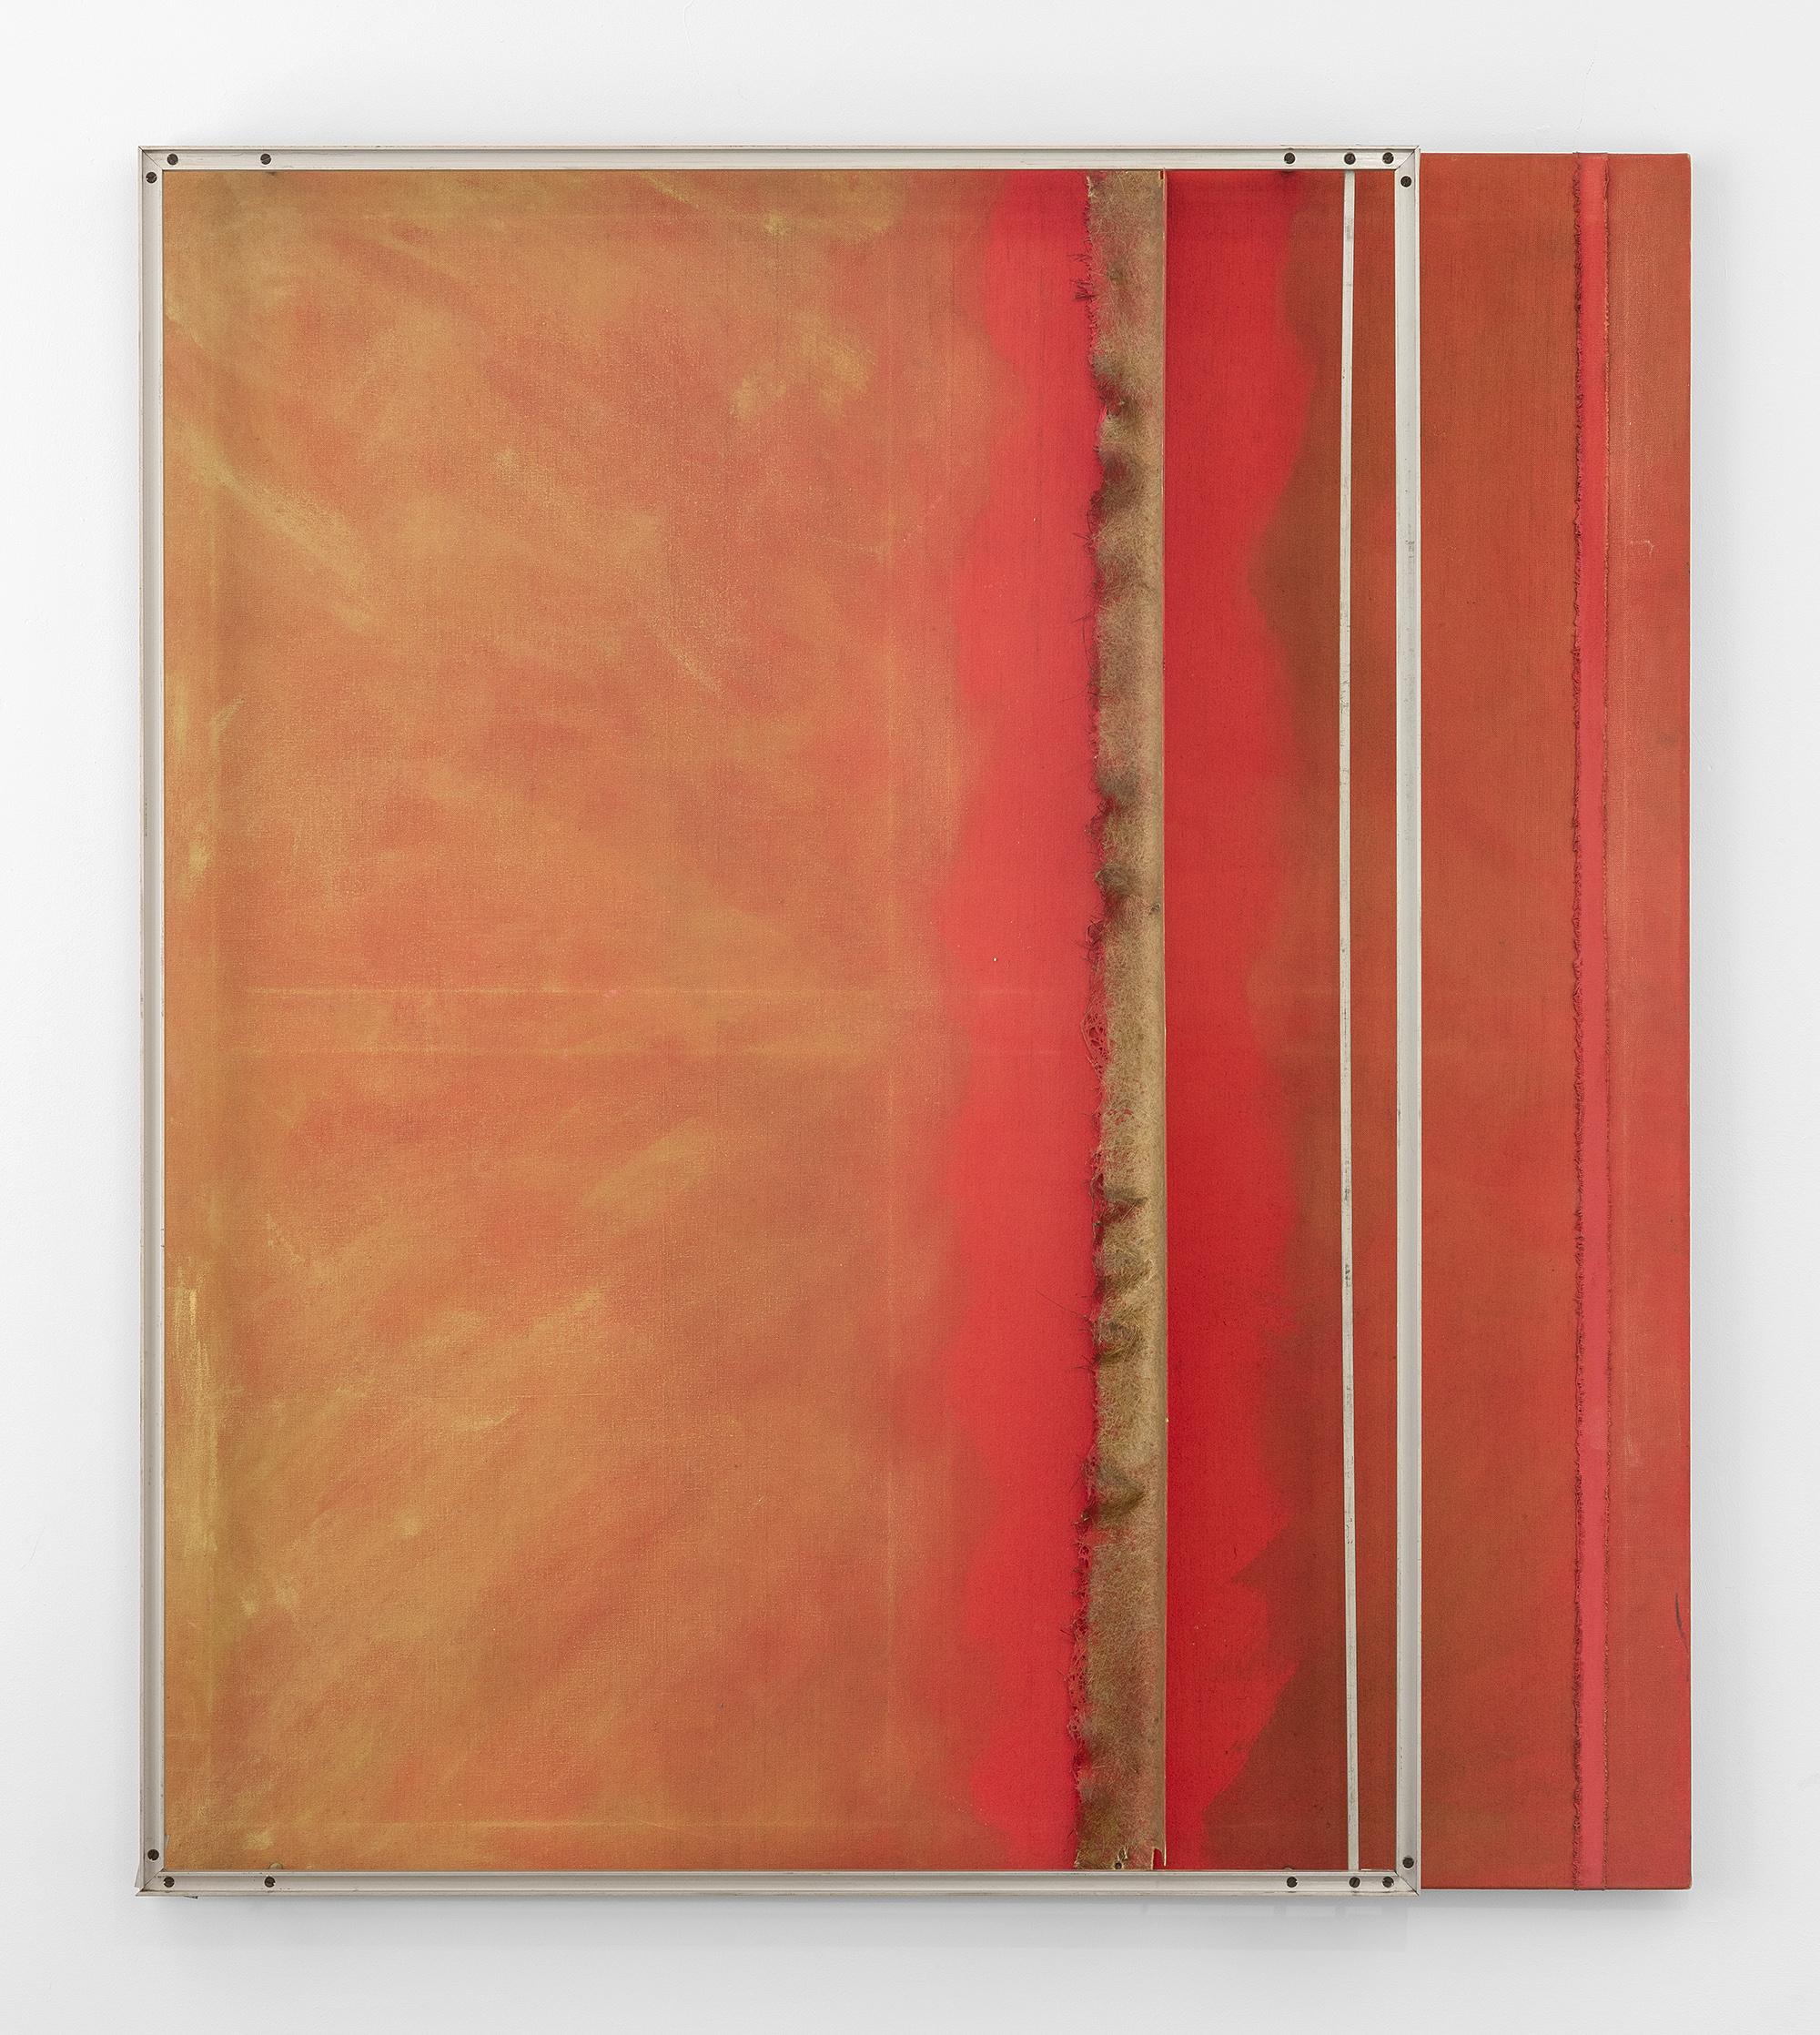 Untitled, 1973 - Acrylic on canvas with aluminium and fibreglass construction, British Abstraction - Sandra Blow 

Signed and dated on canvas overlap
Acrylic on canvas with aluminium and fibreglass construction
48 x 54 inches

Sandra Blow